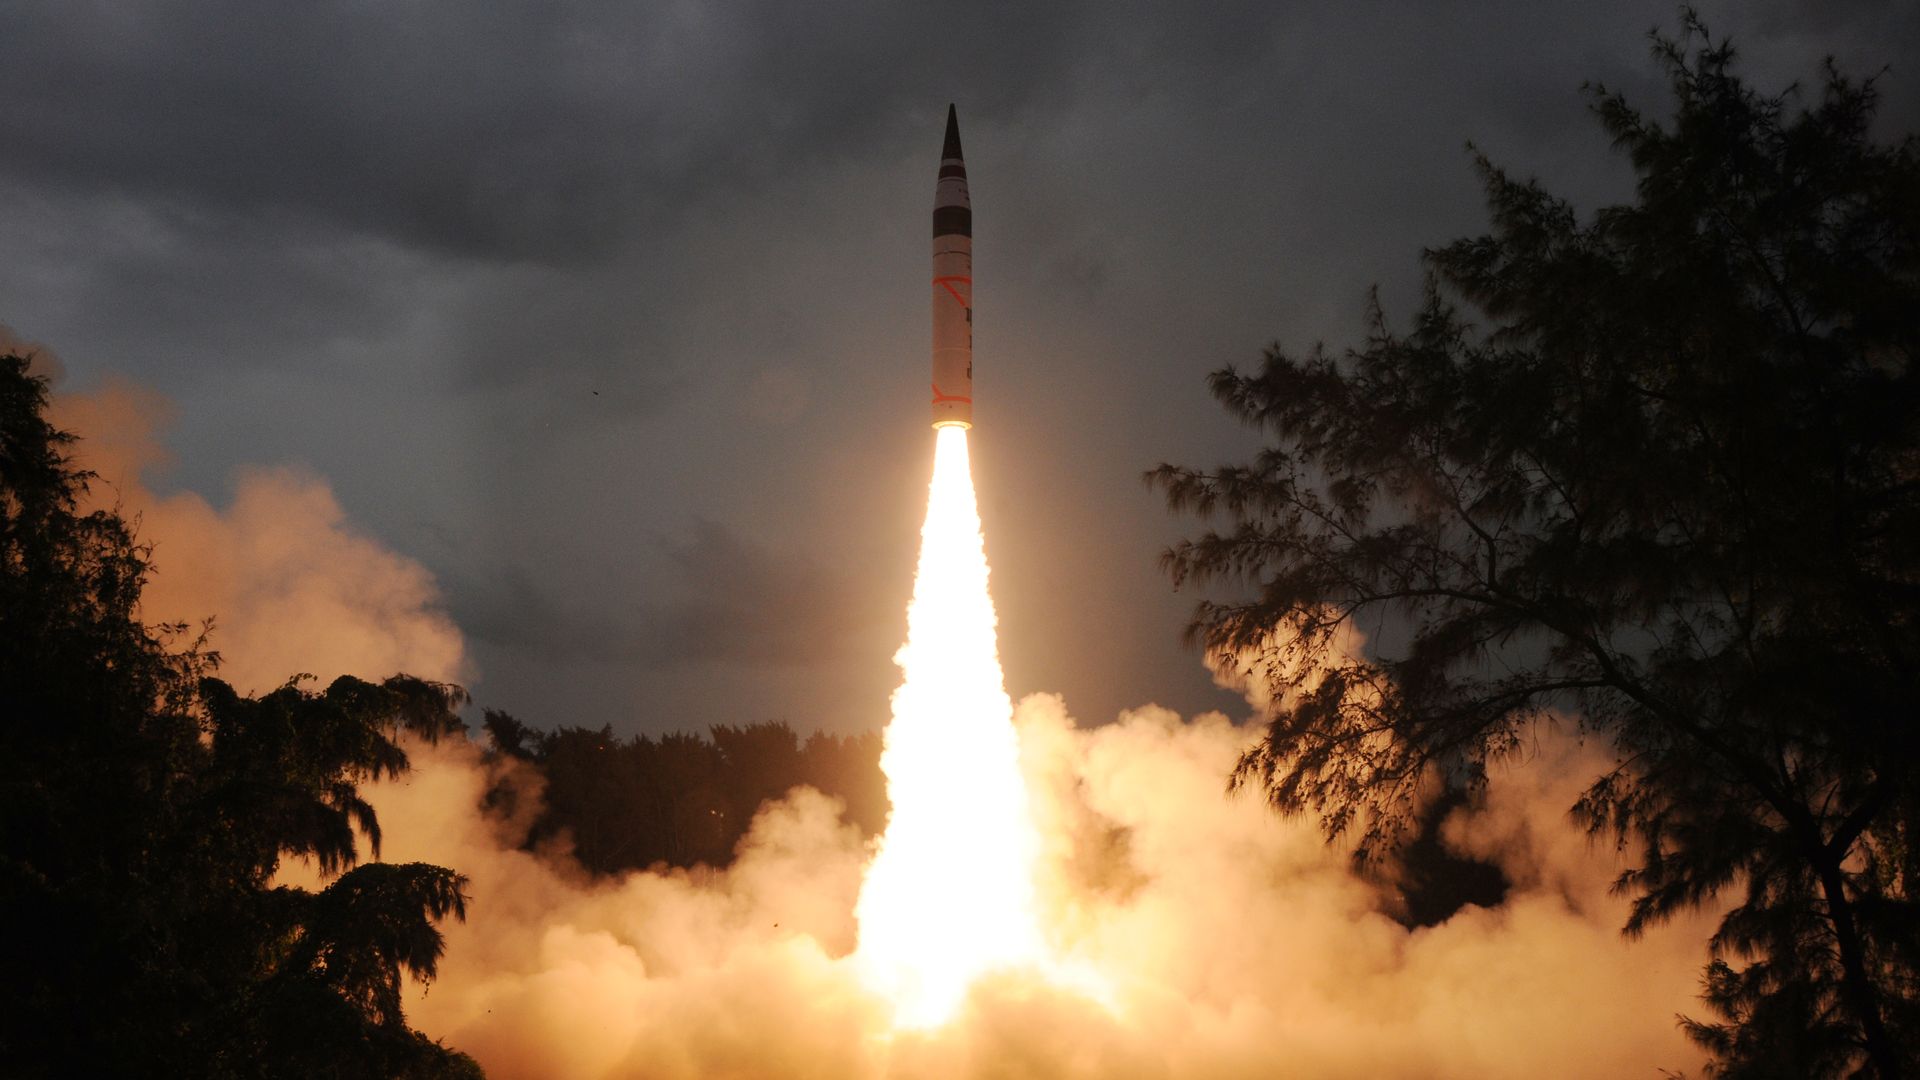 Image of an Indian long-range nuclear-capable missile being launched.